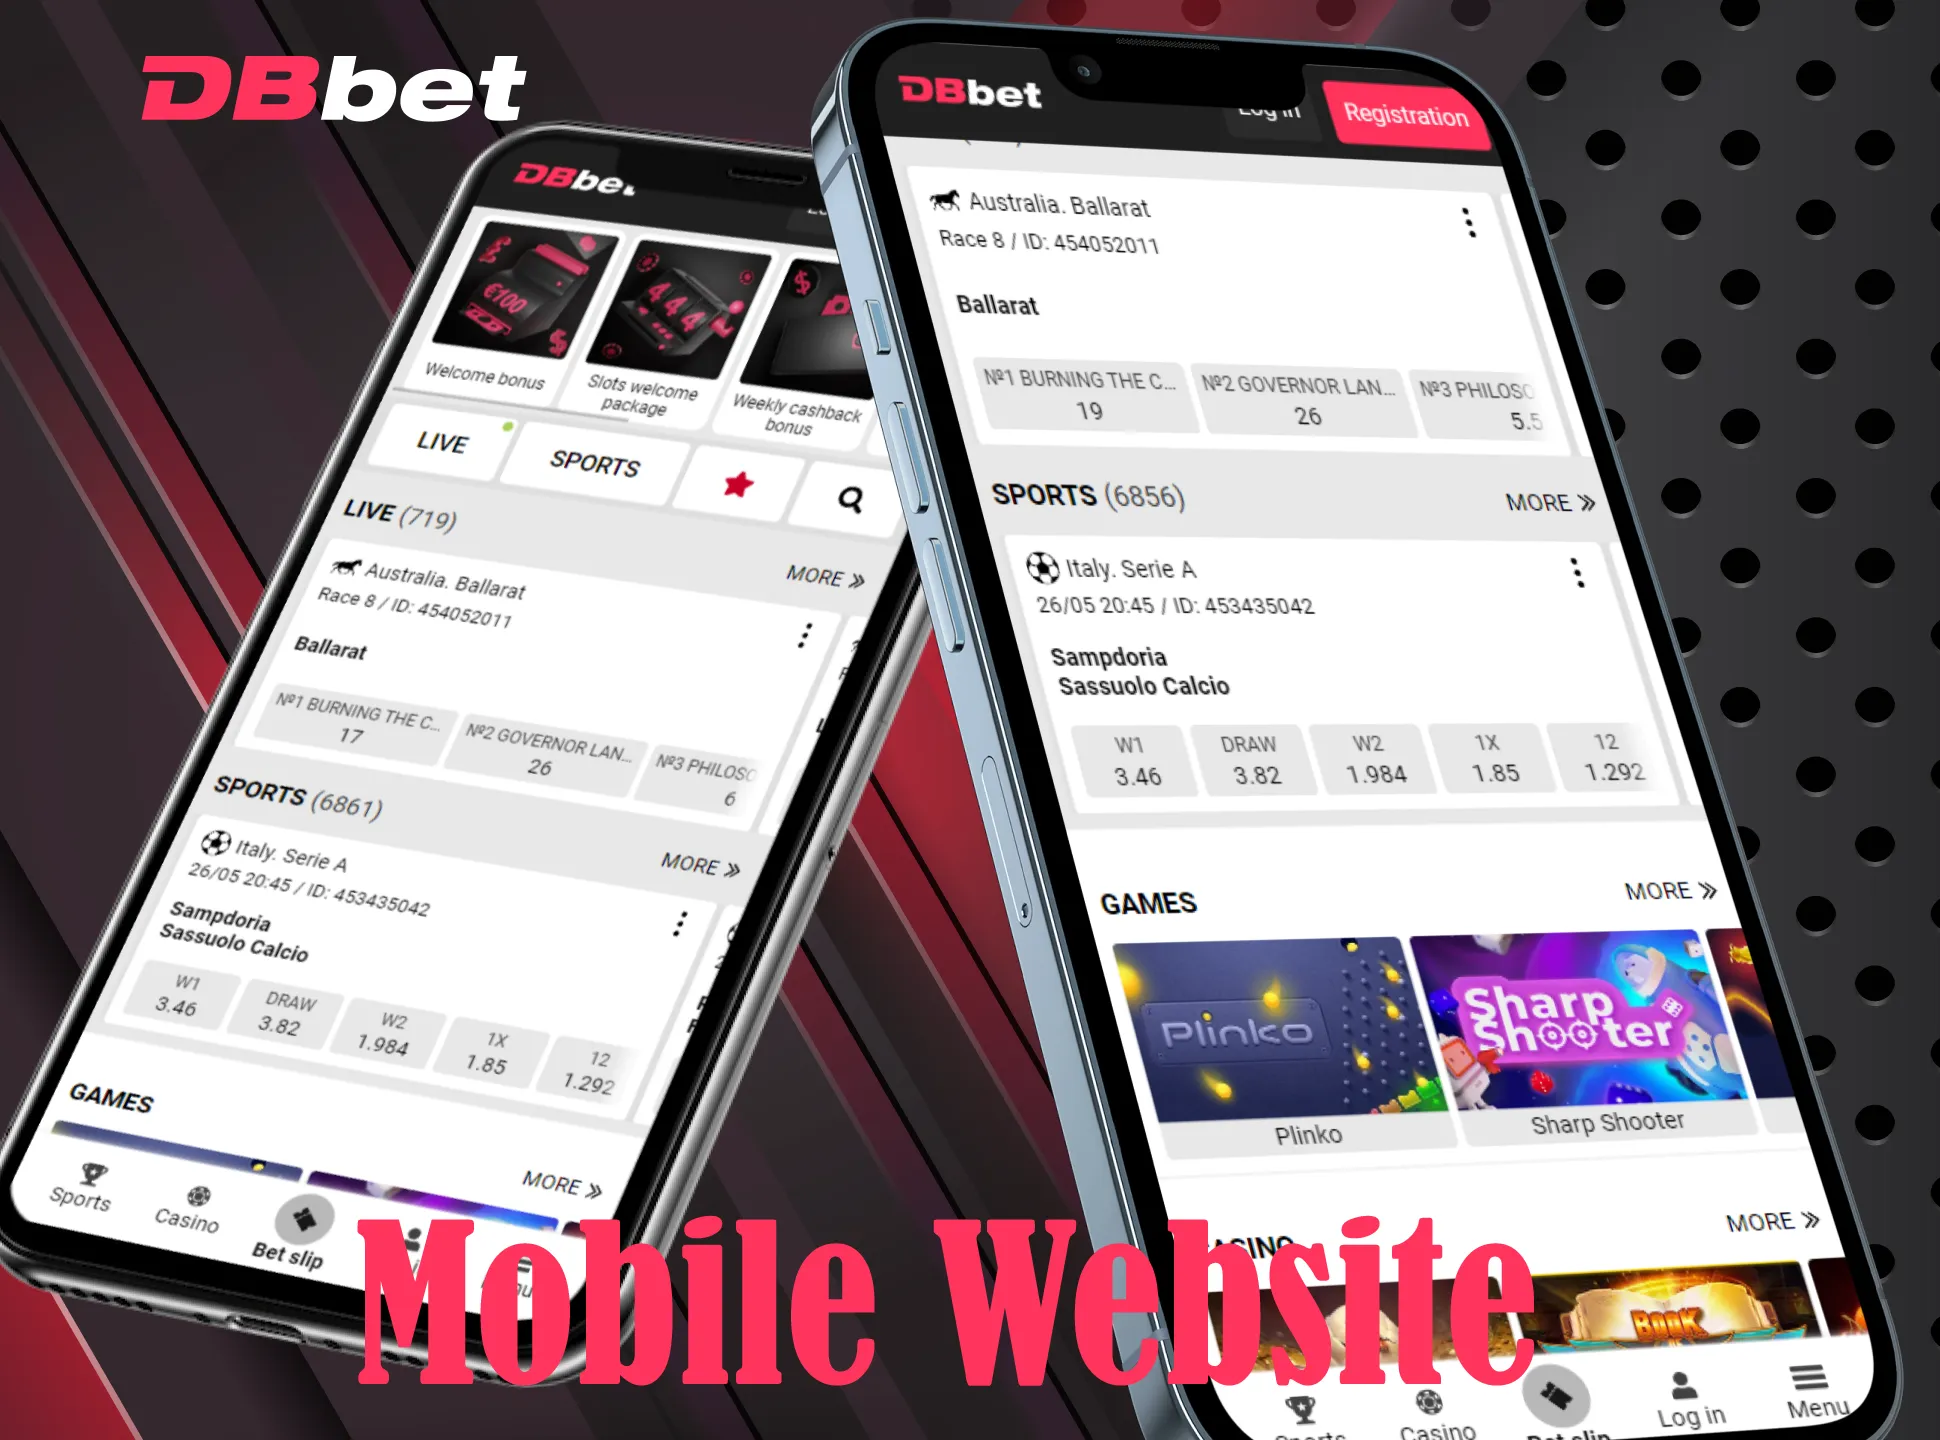 Bet at DBbet using mobile version of website.